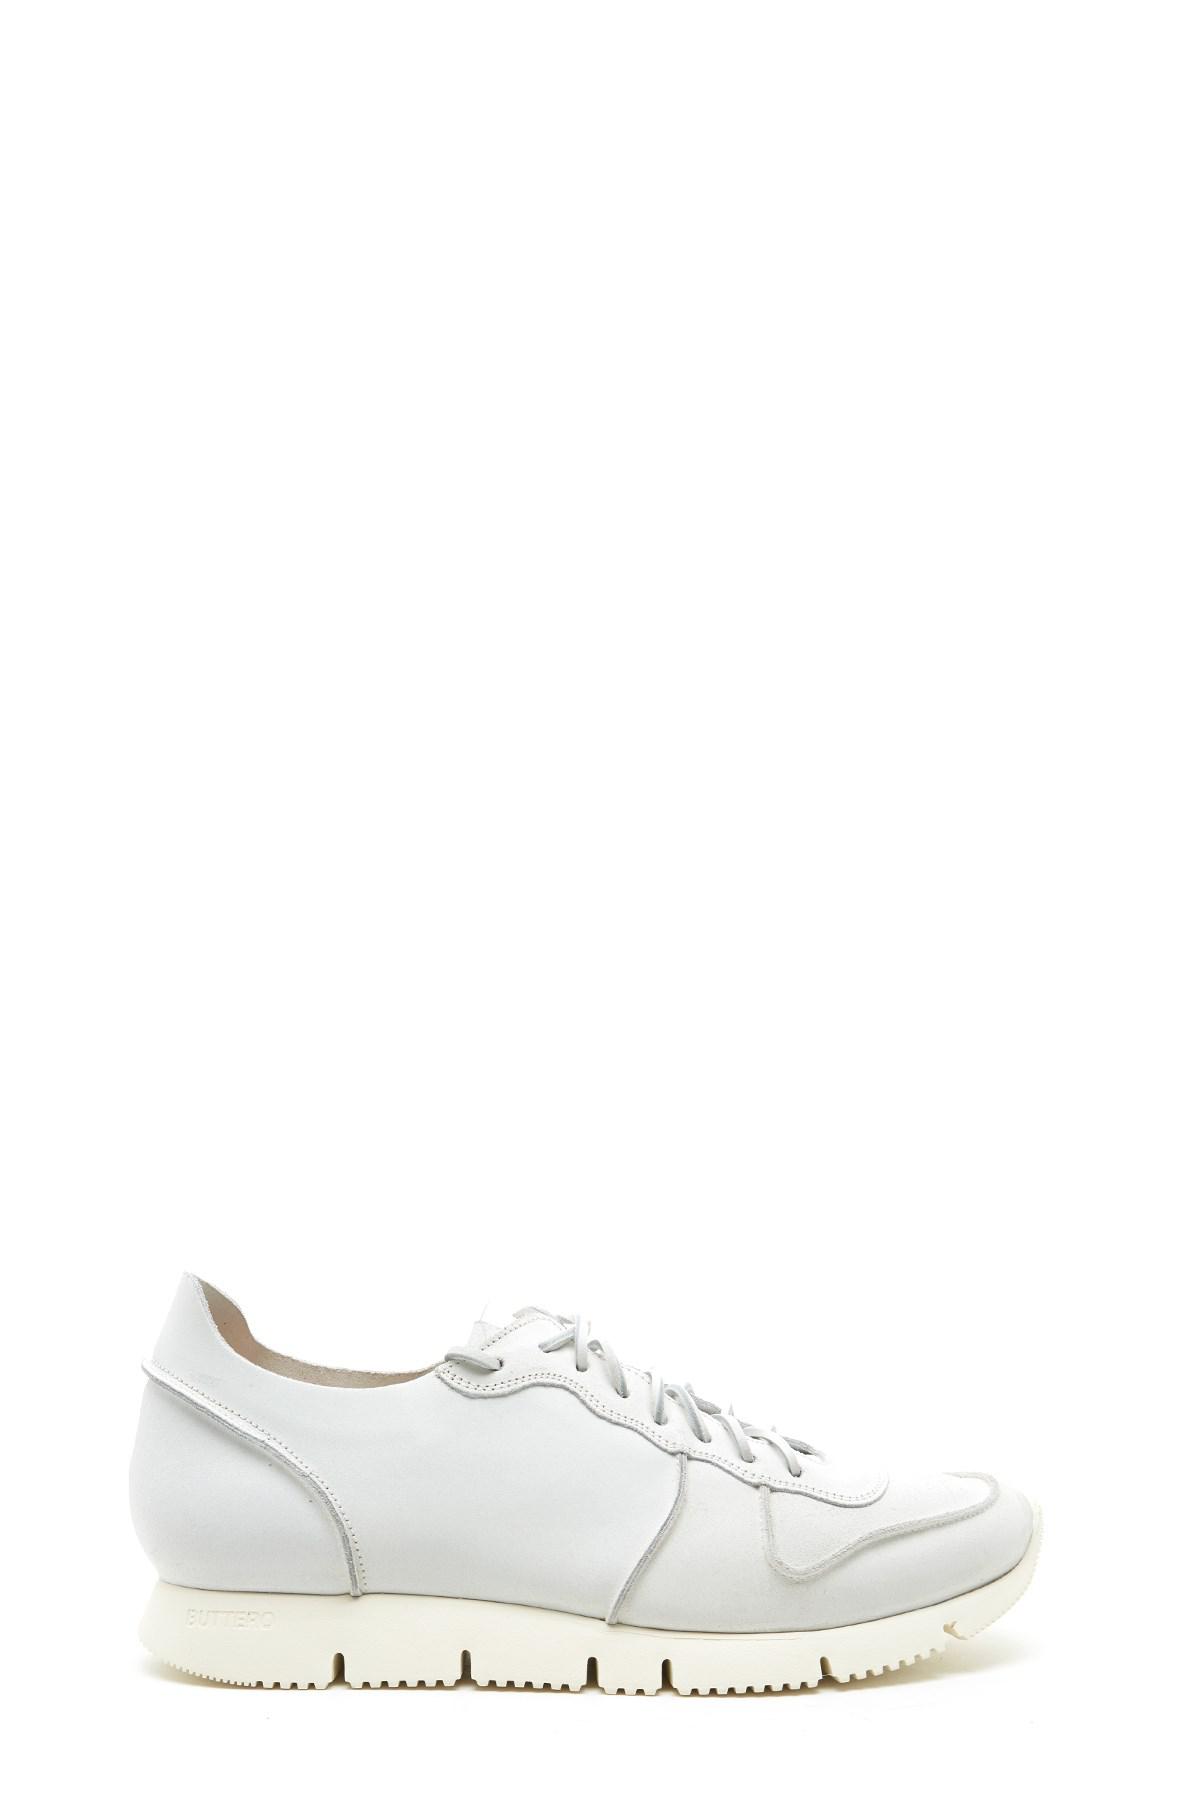 Buttero Leather B5910 Carrera Sneakers Crack White for Men - Lyst